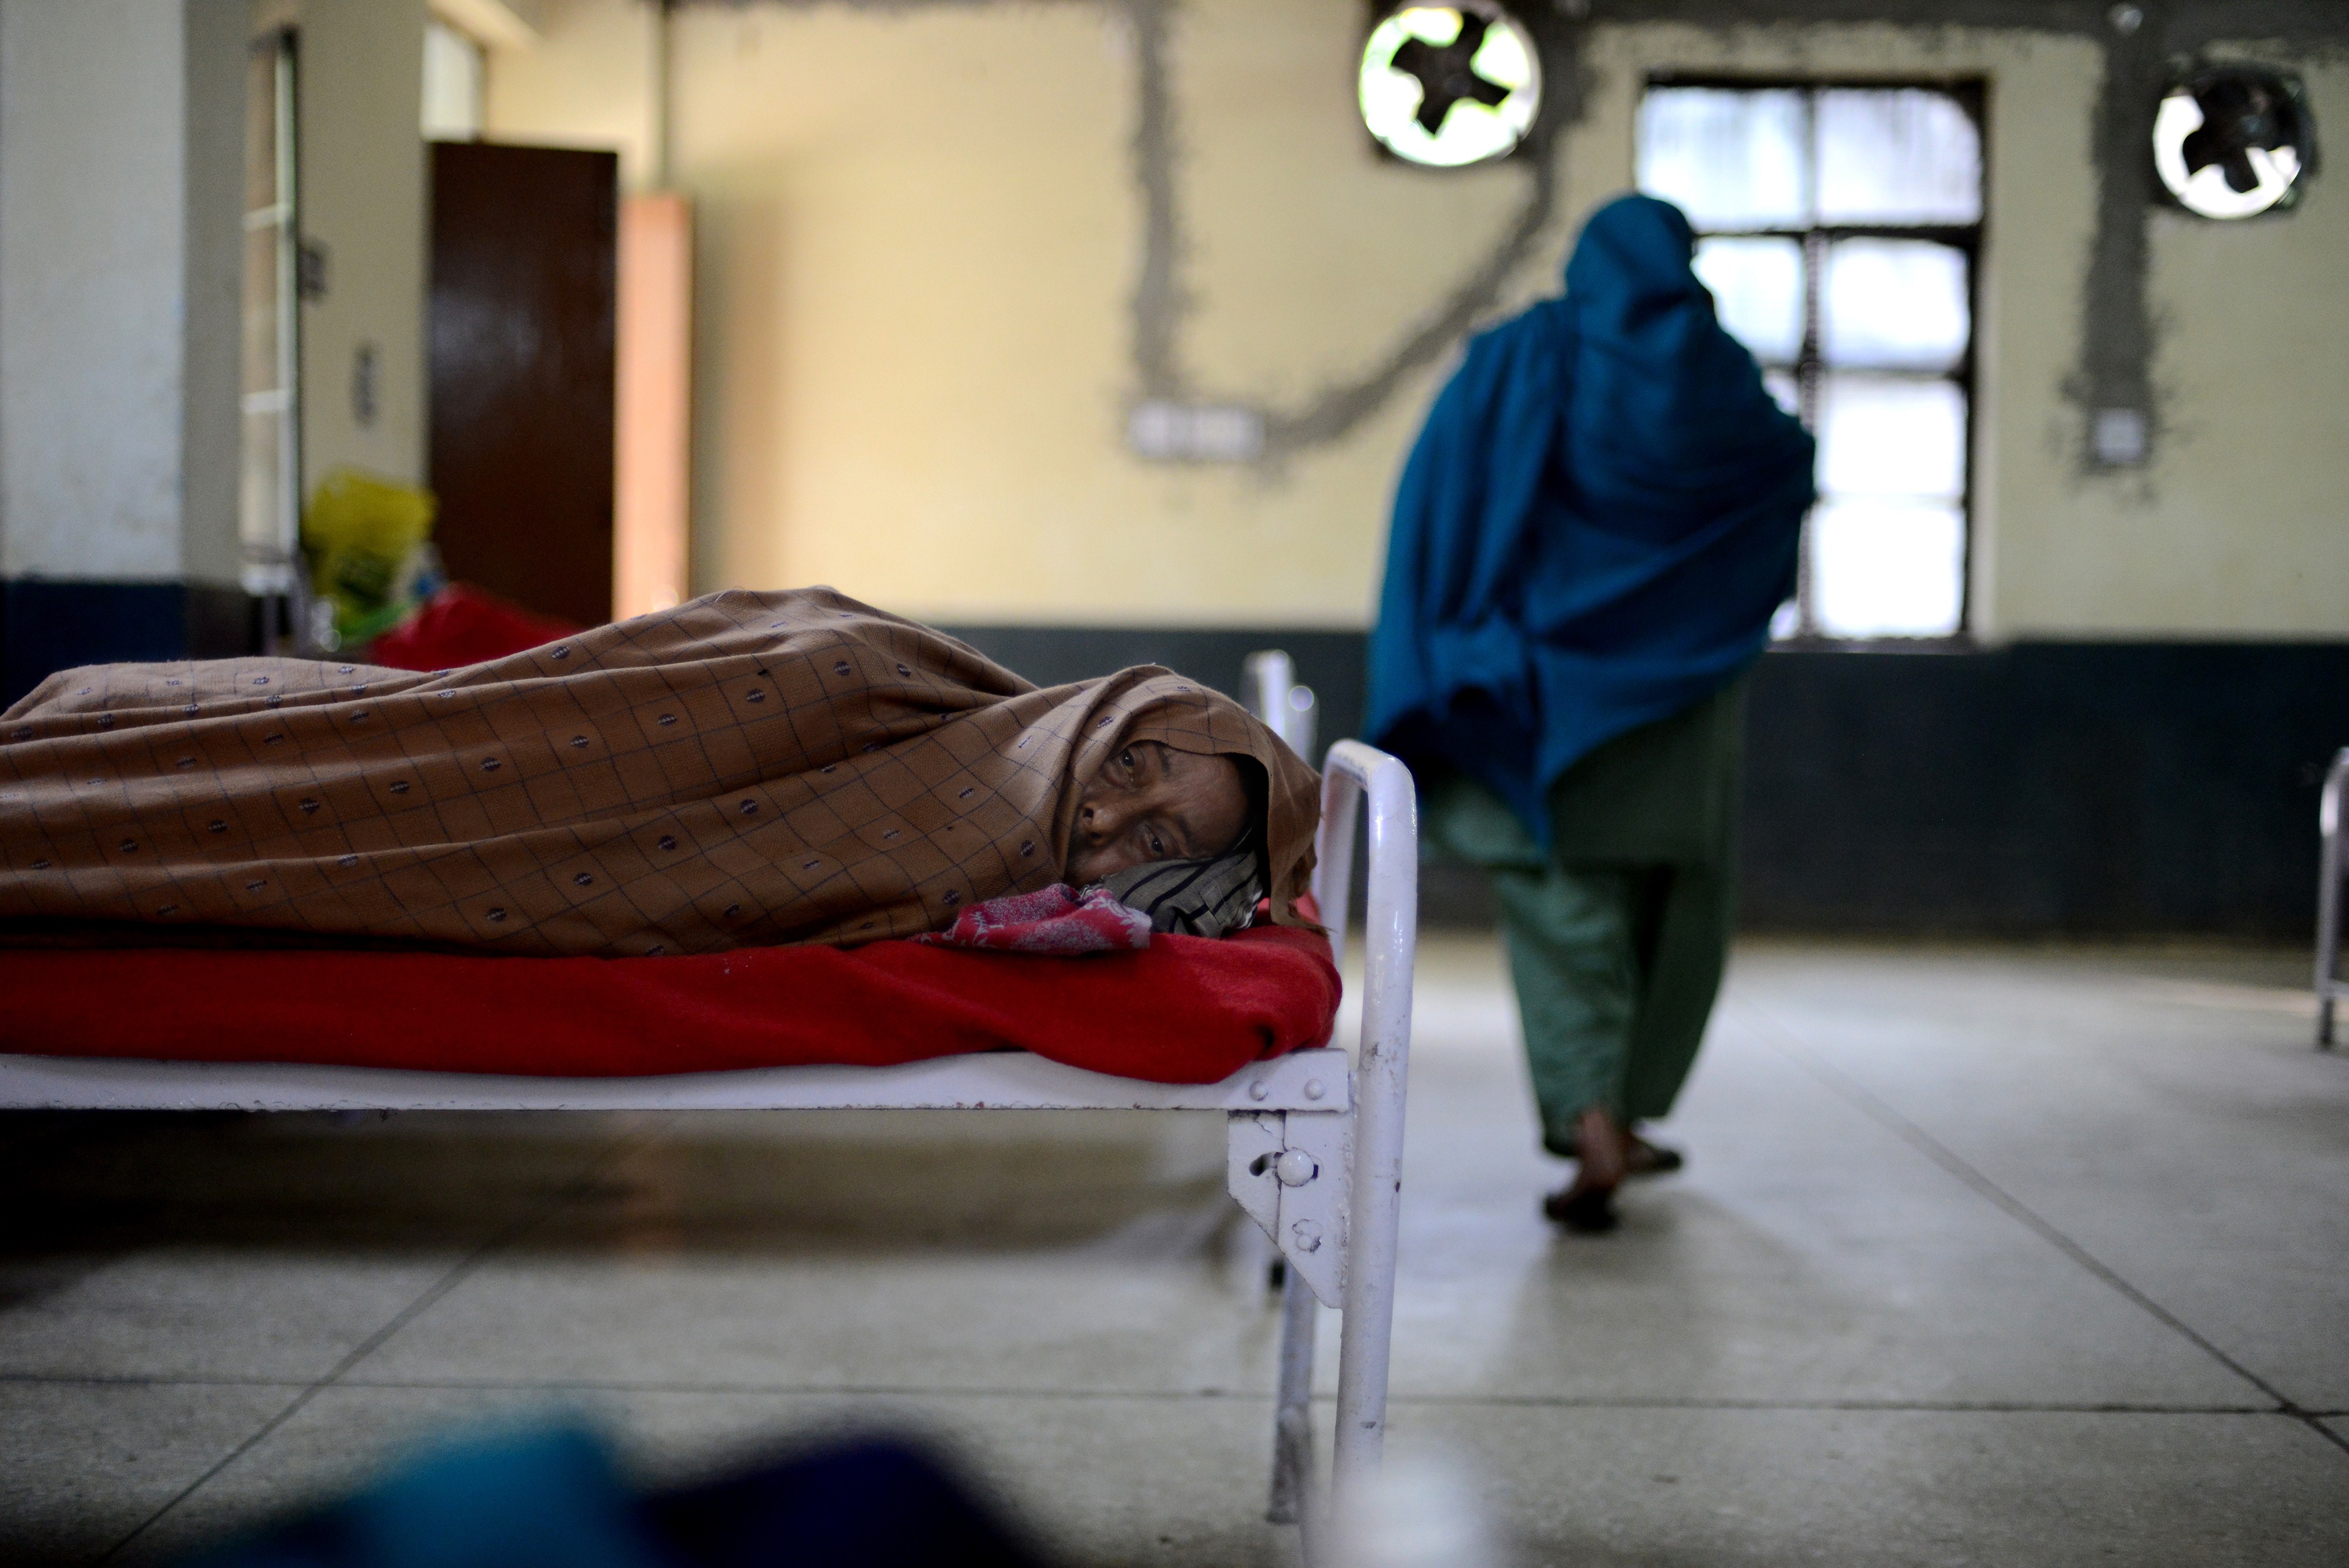 An Indian tuberculosis patient rests at the Rajan Babu Tuberculosis Hospital in New Delhi on March 24, 2014. (AFP&amp;mdash;AFP/Getty Images)